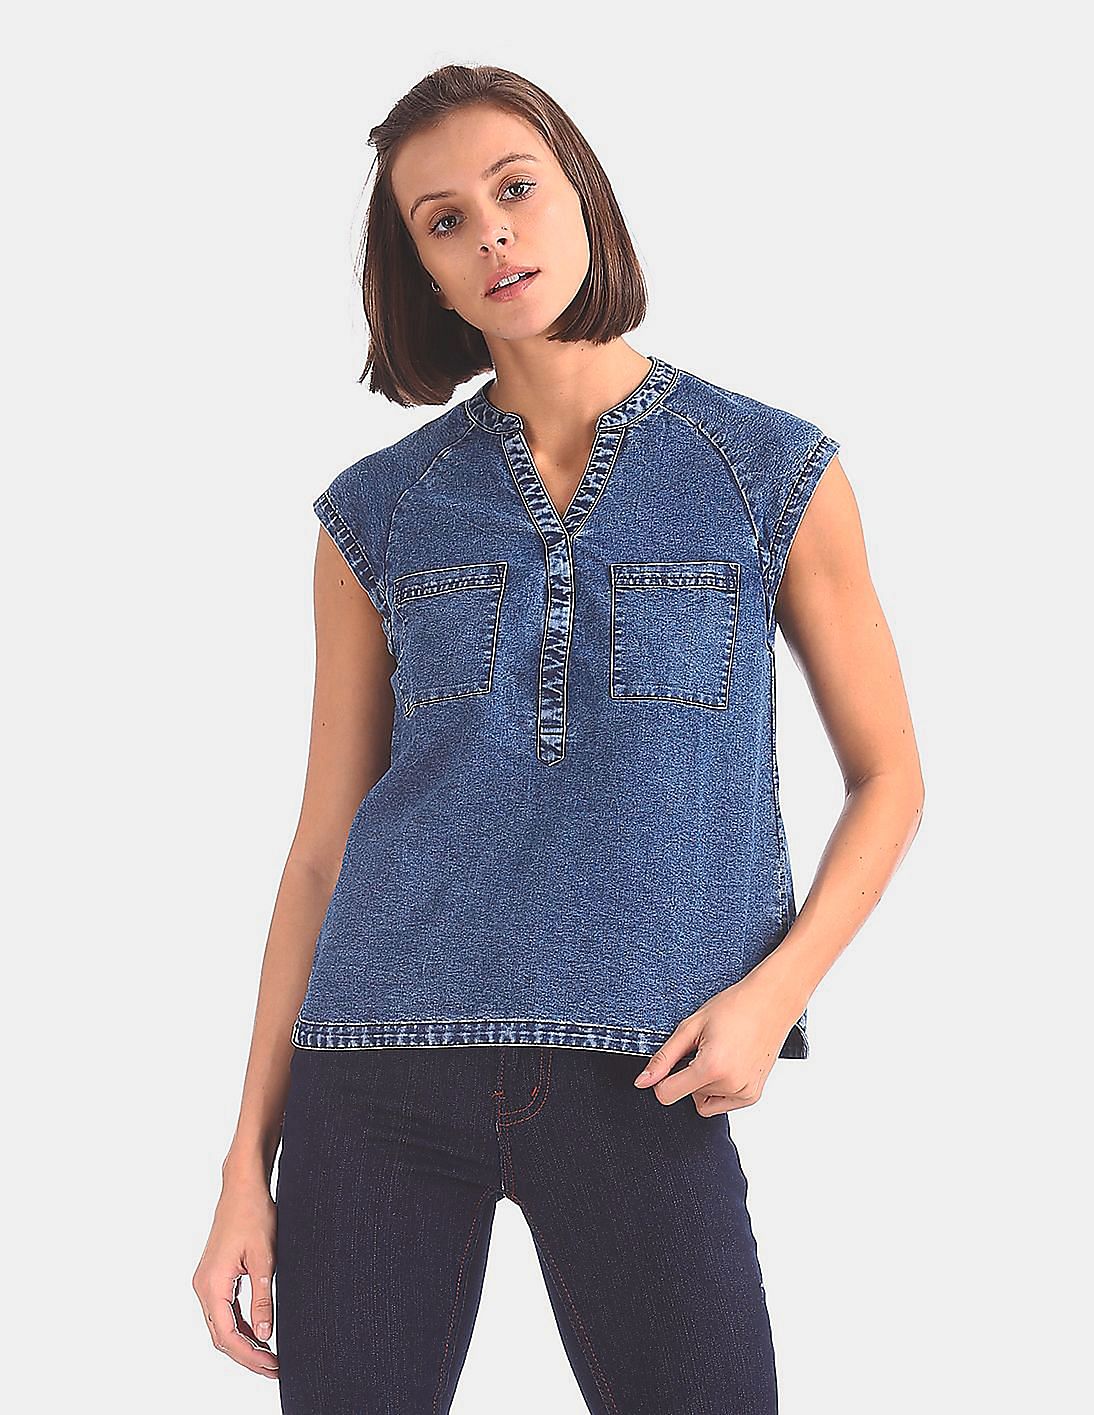 online jeans top shopping